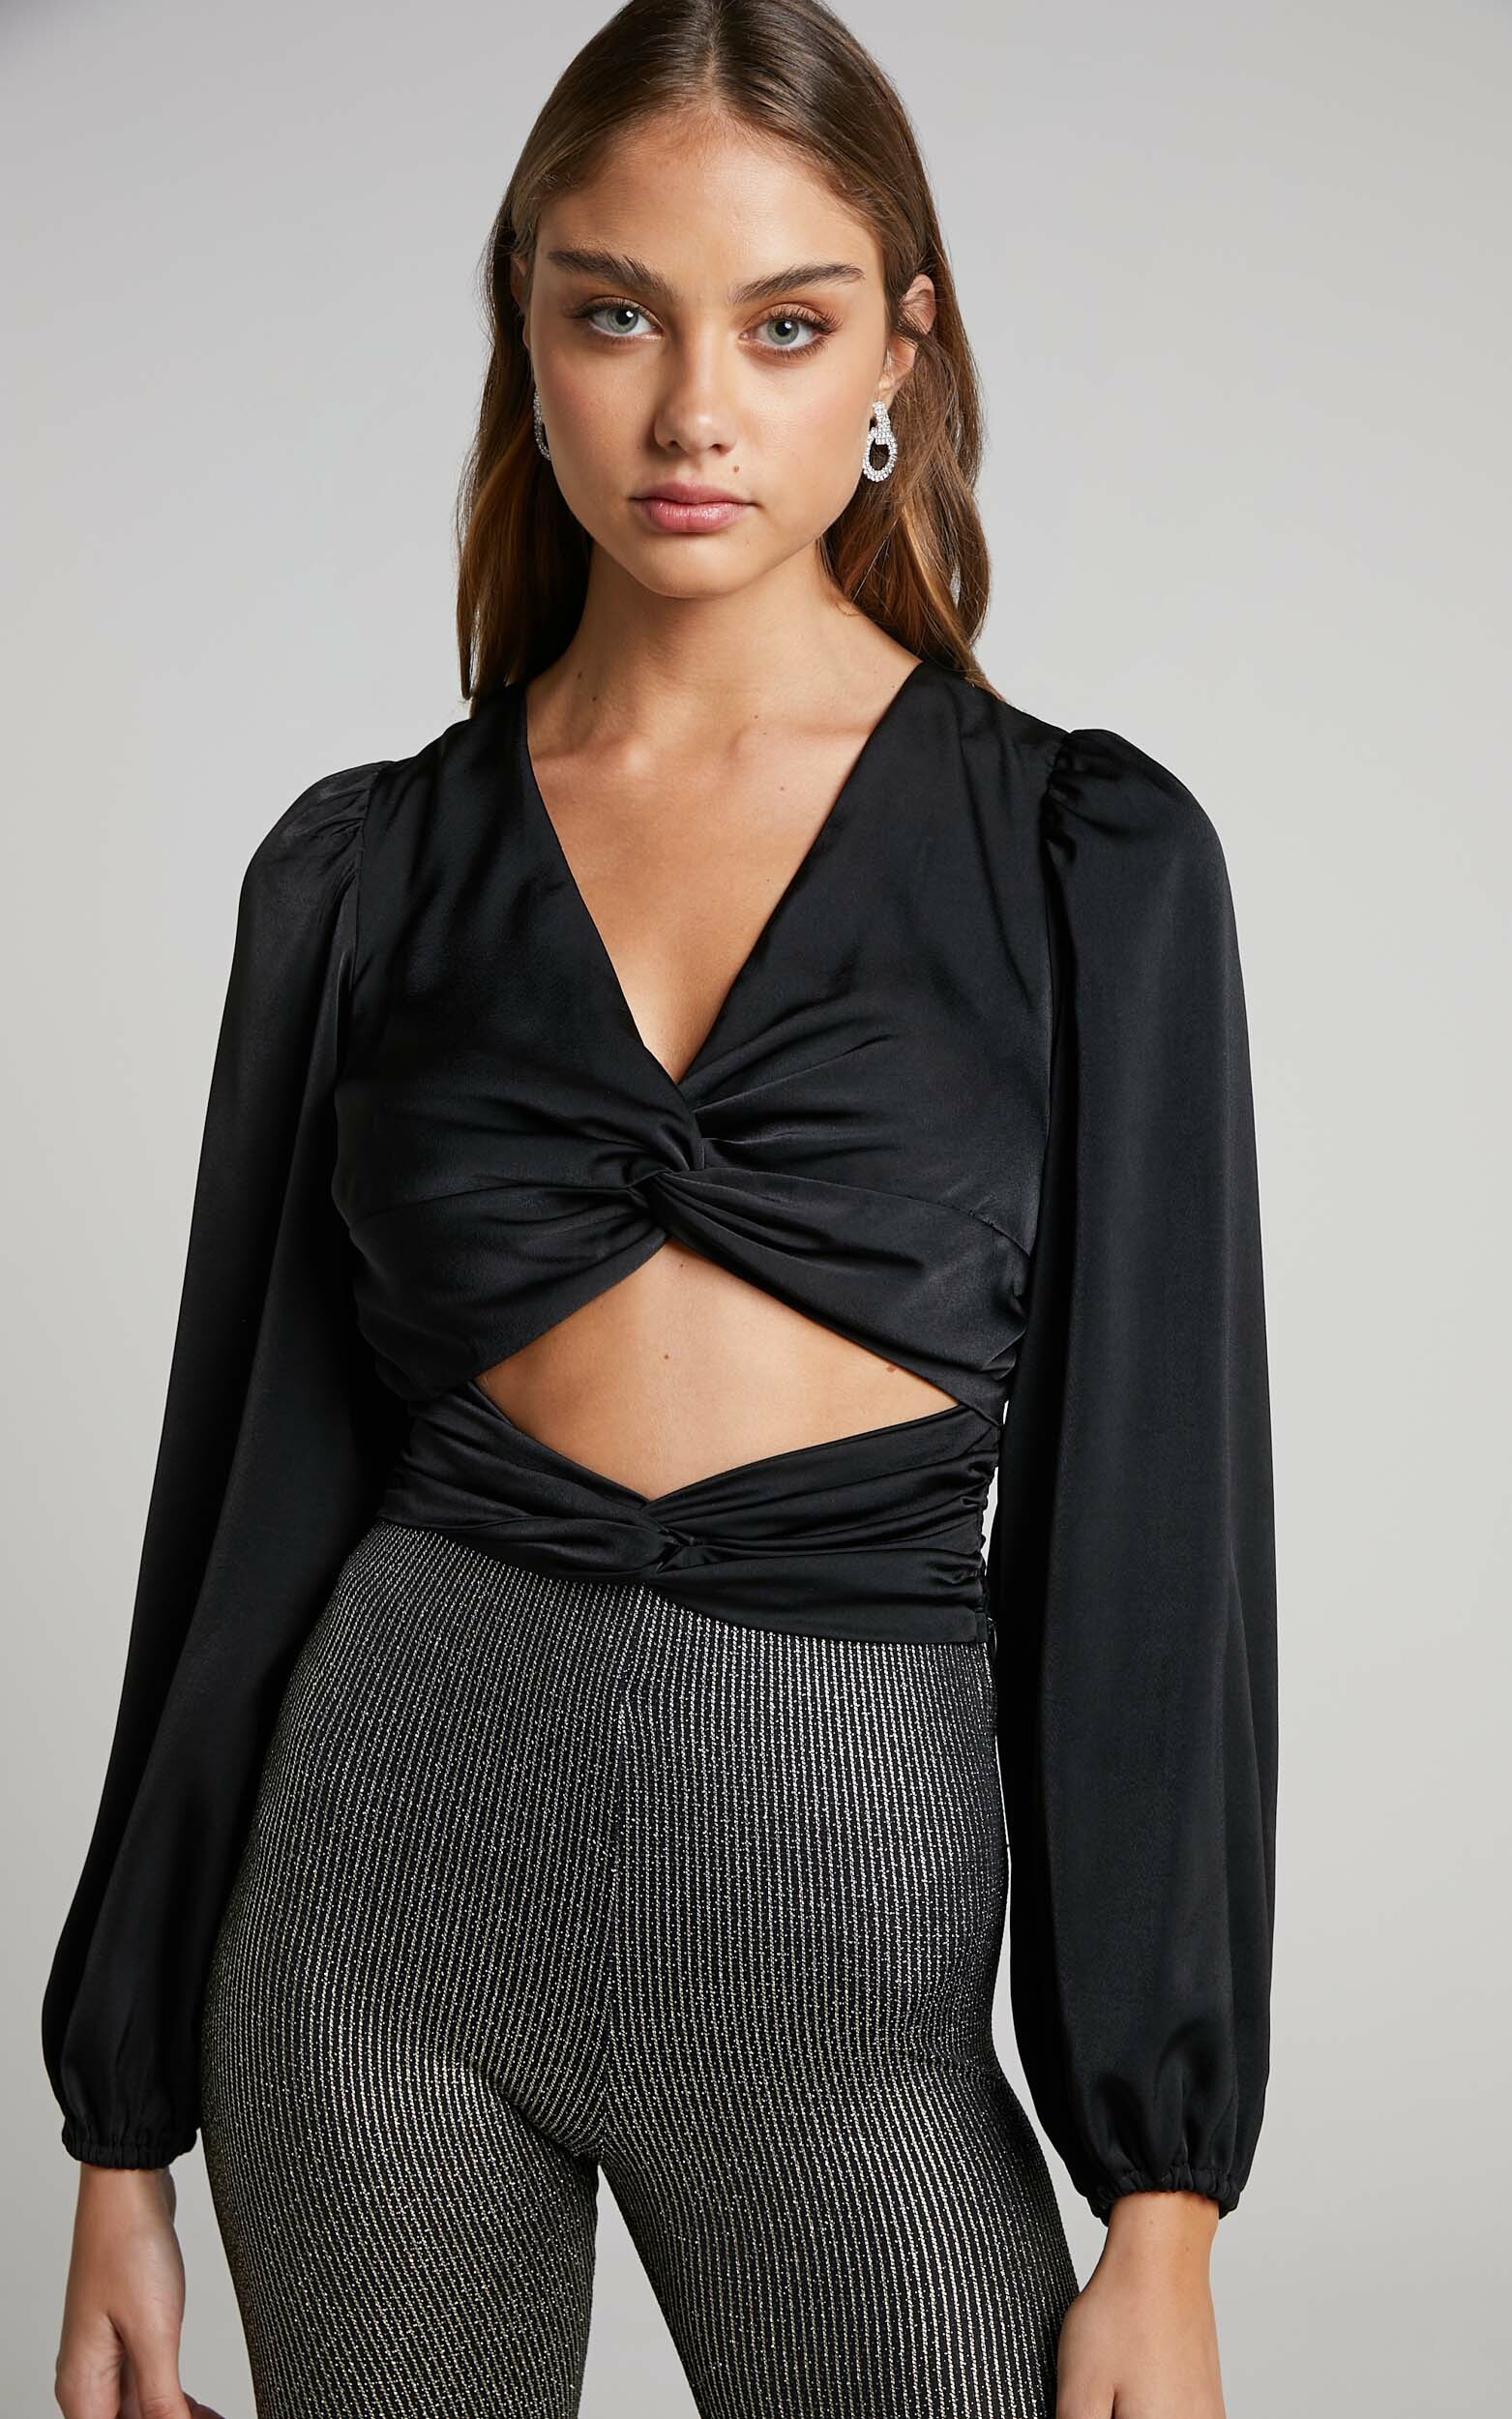 Ransley Top - Cut Out Twist Front Long Sleeve Blouse in Black - 06, BLK1, hi-res image number null